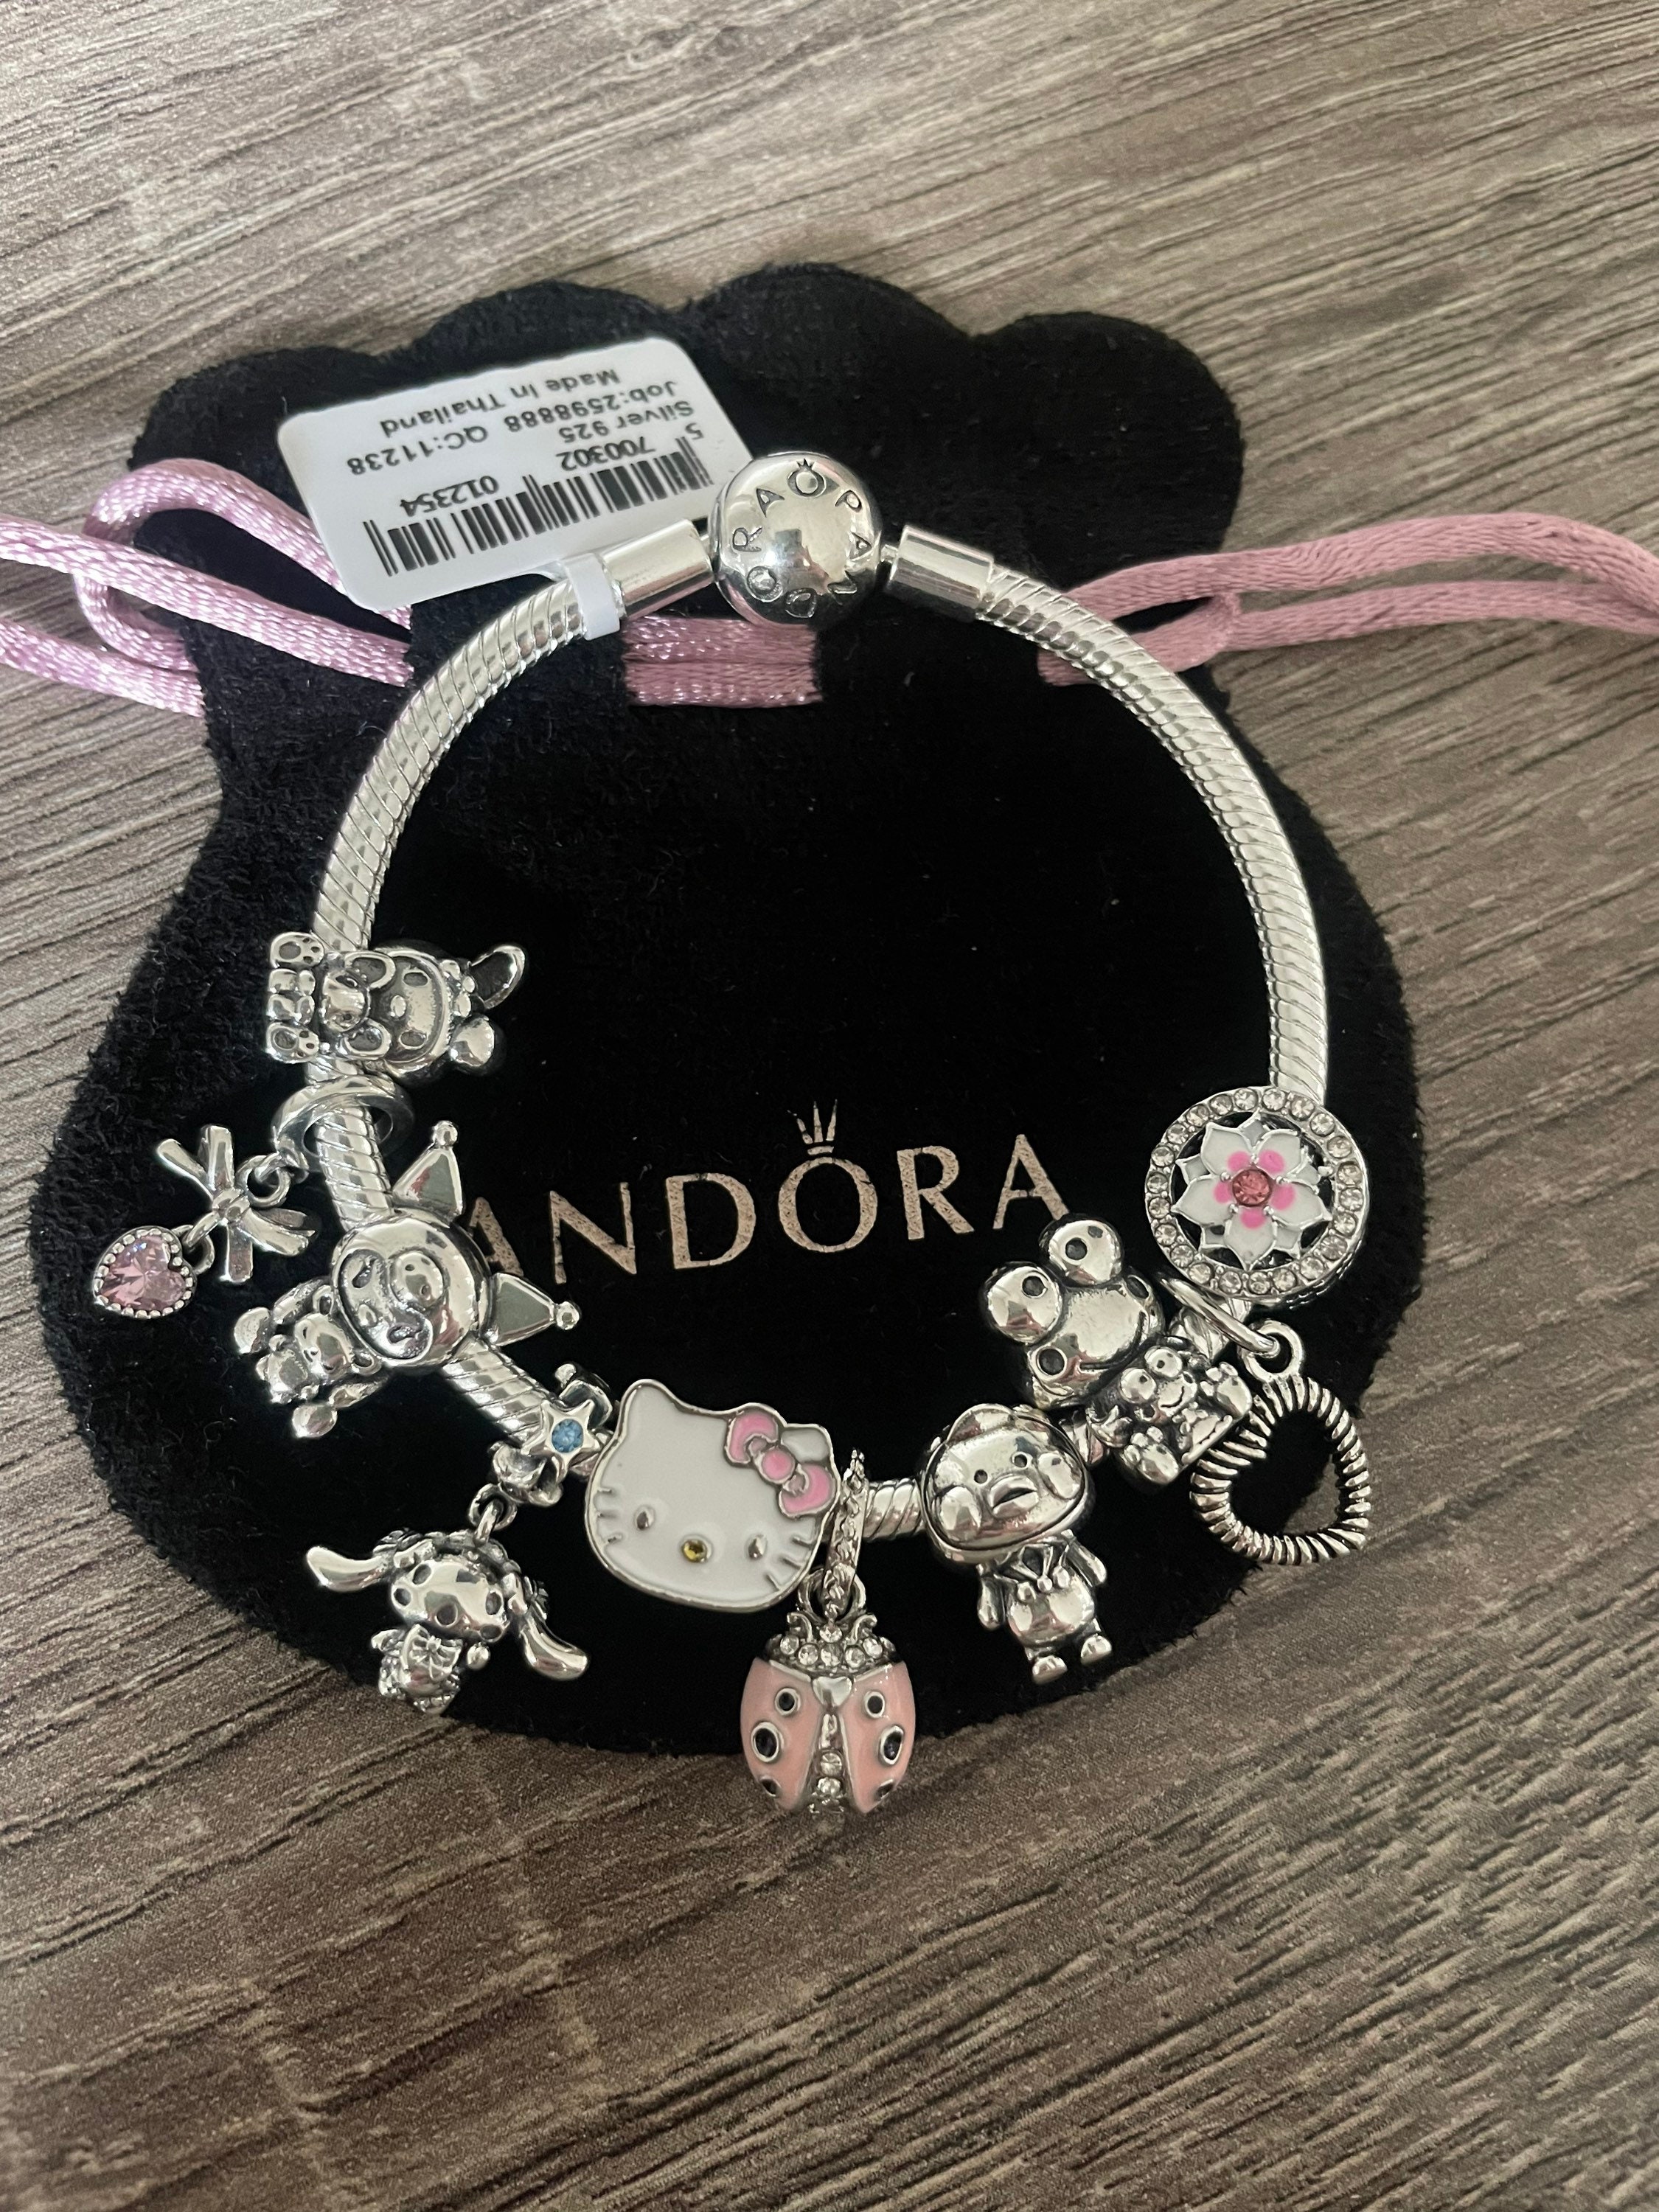 Y2K Hello Kitty Necklace Choker Chain Alloy Silver Crystals Female Bracelet Pendant Sanrio Collar Women Jewelry Gift Girls Toy, Women's, Size: One